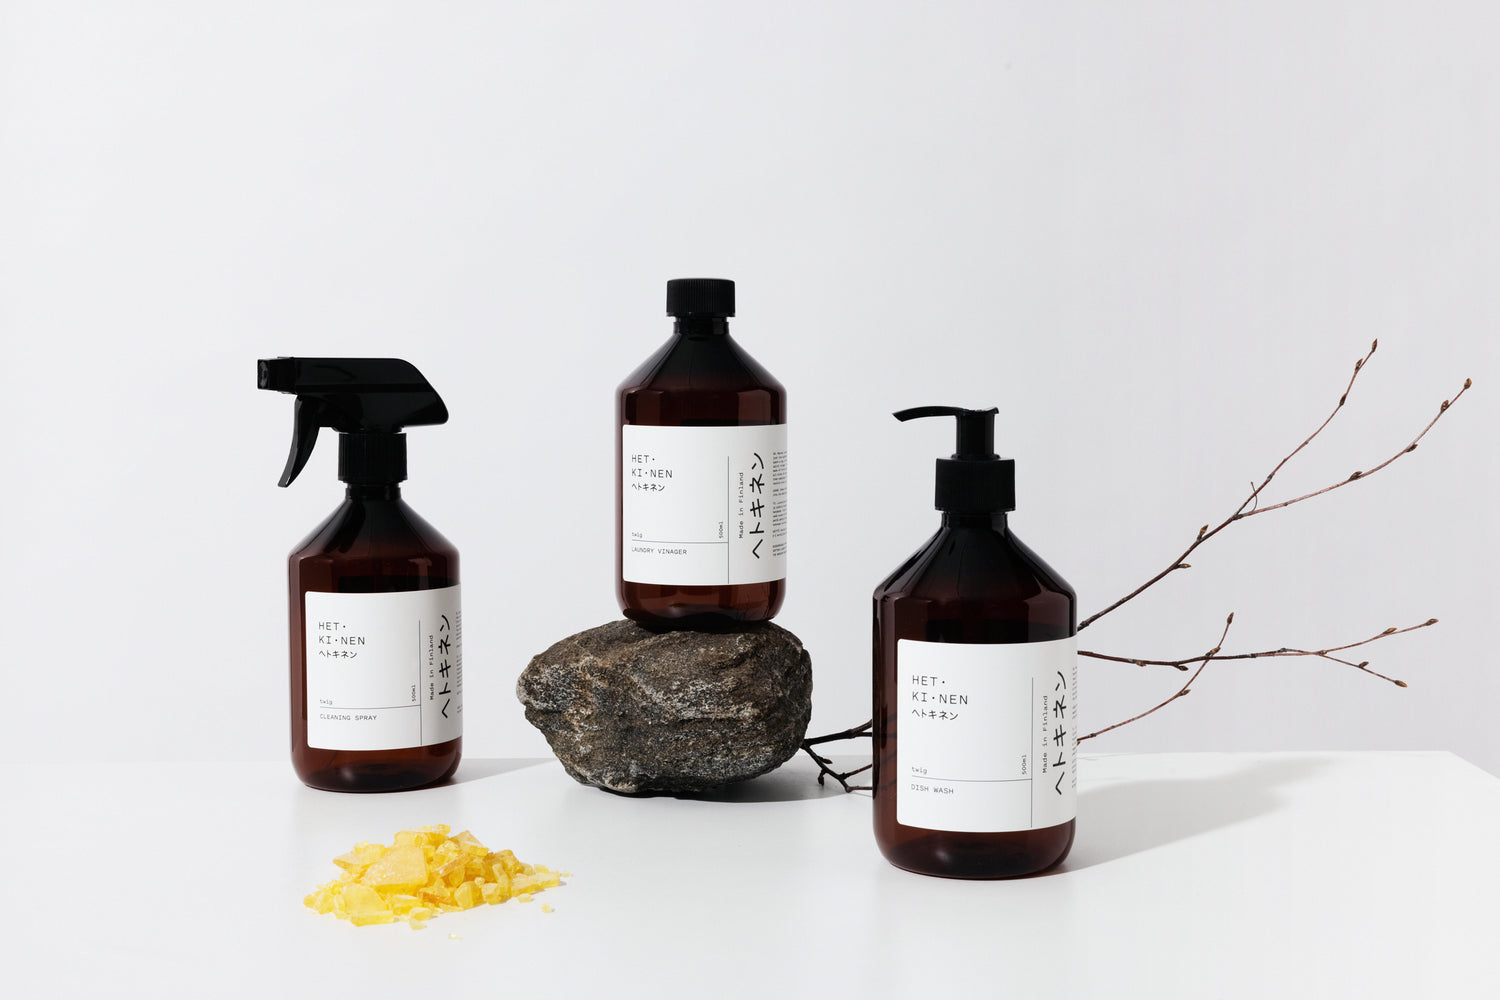 TWIG Natural laundry detergent